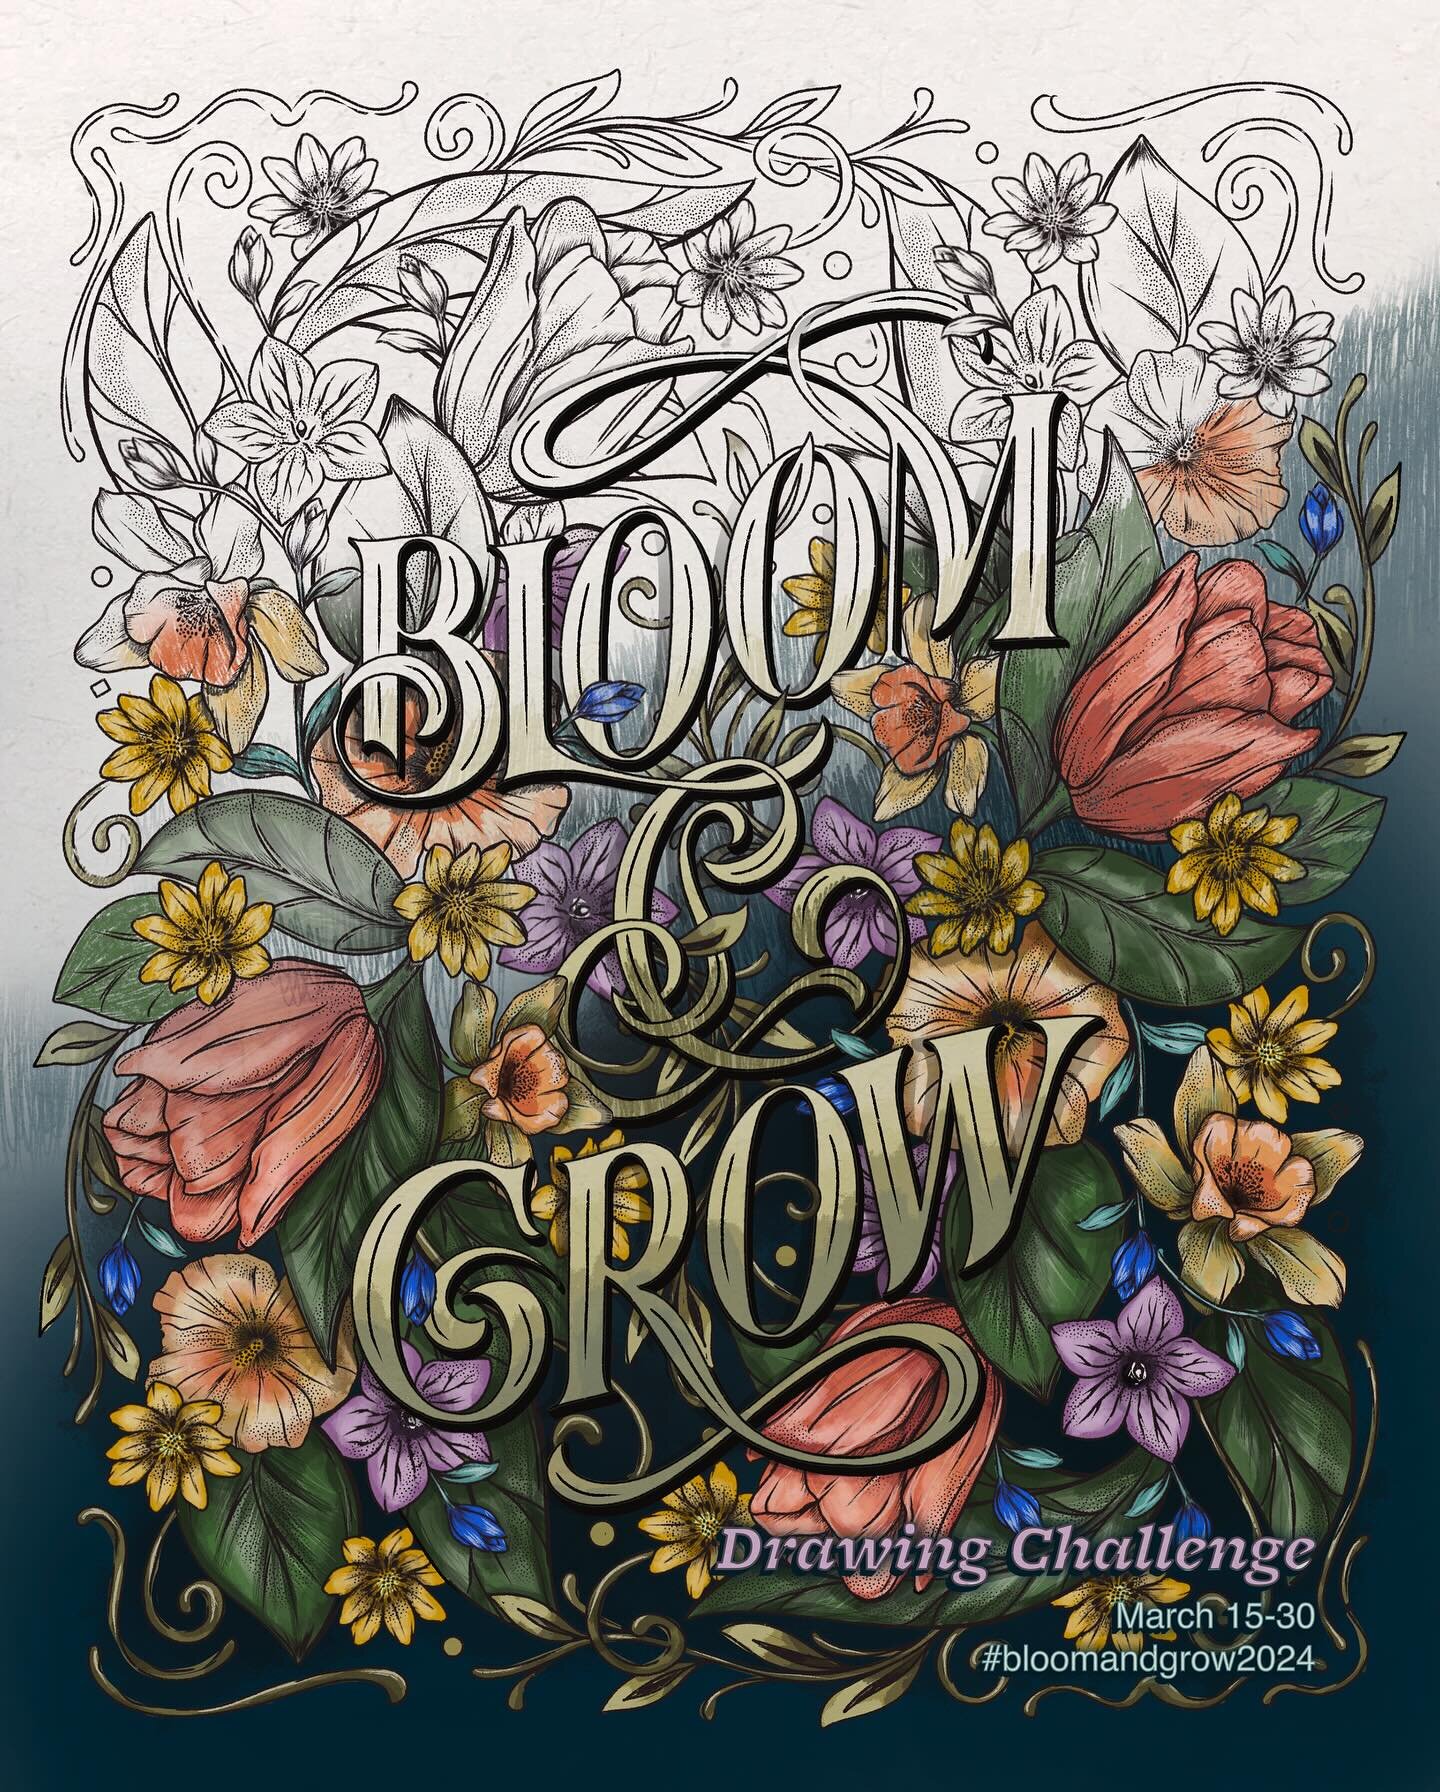 So excited to share that I&rsquo;m teaming up with @bluelela @riritamuradesign @createdbyginny @seejessletter @byerikawithak @chickofalltrade @theinkingrose 

to host the Bloom and Grow Drawing Challenge from March 15 - 30, and we are inviting you to